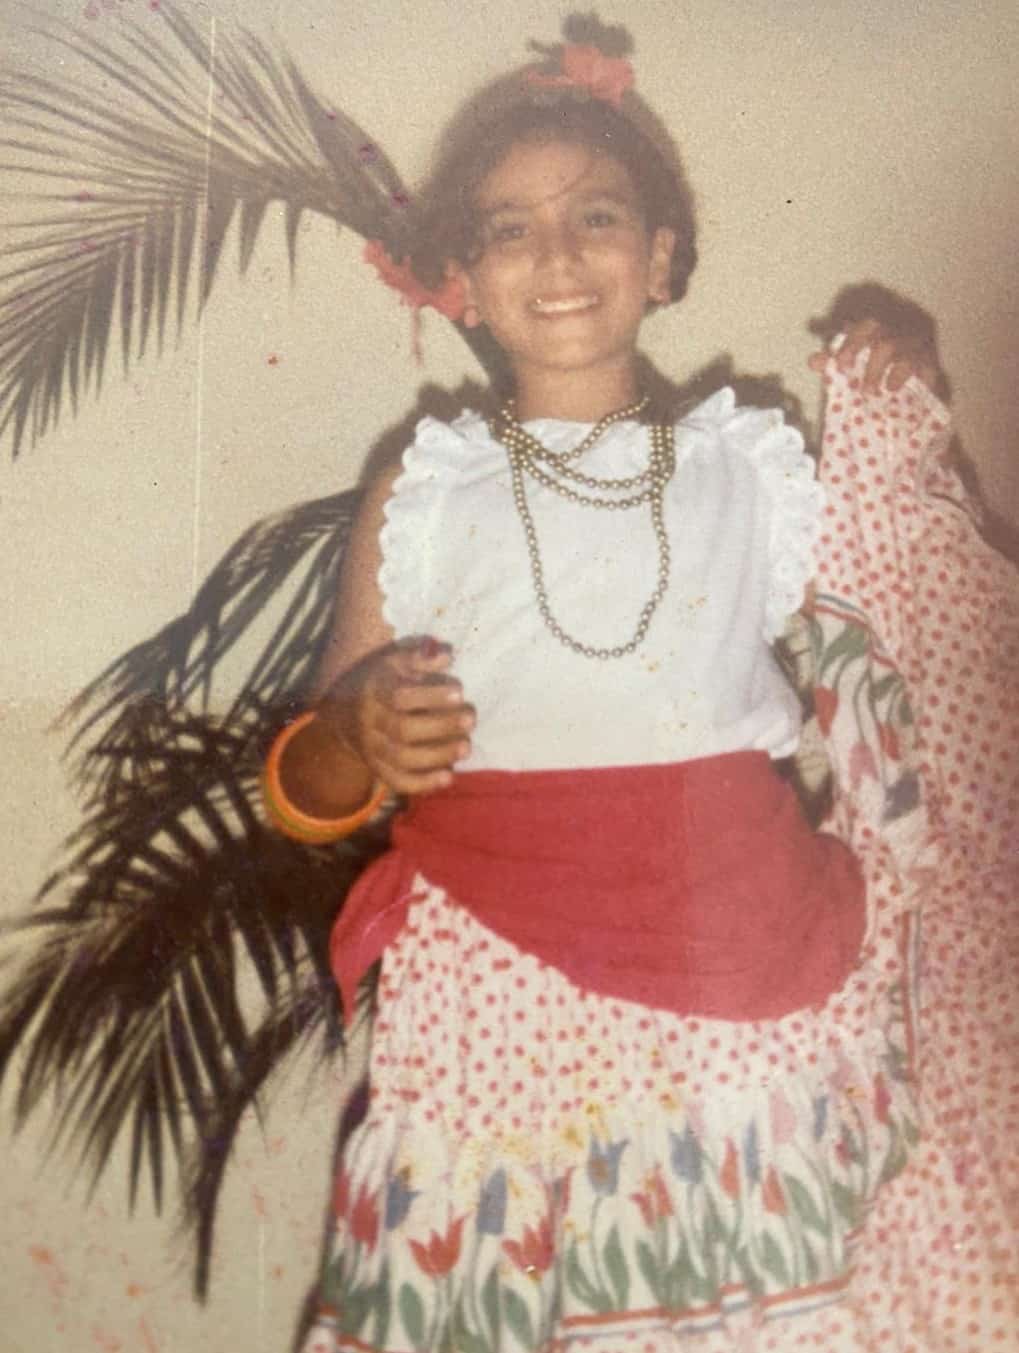 Ariana in a traditional dance costume as a child.